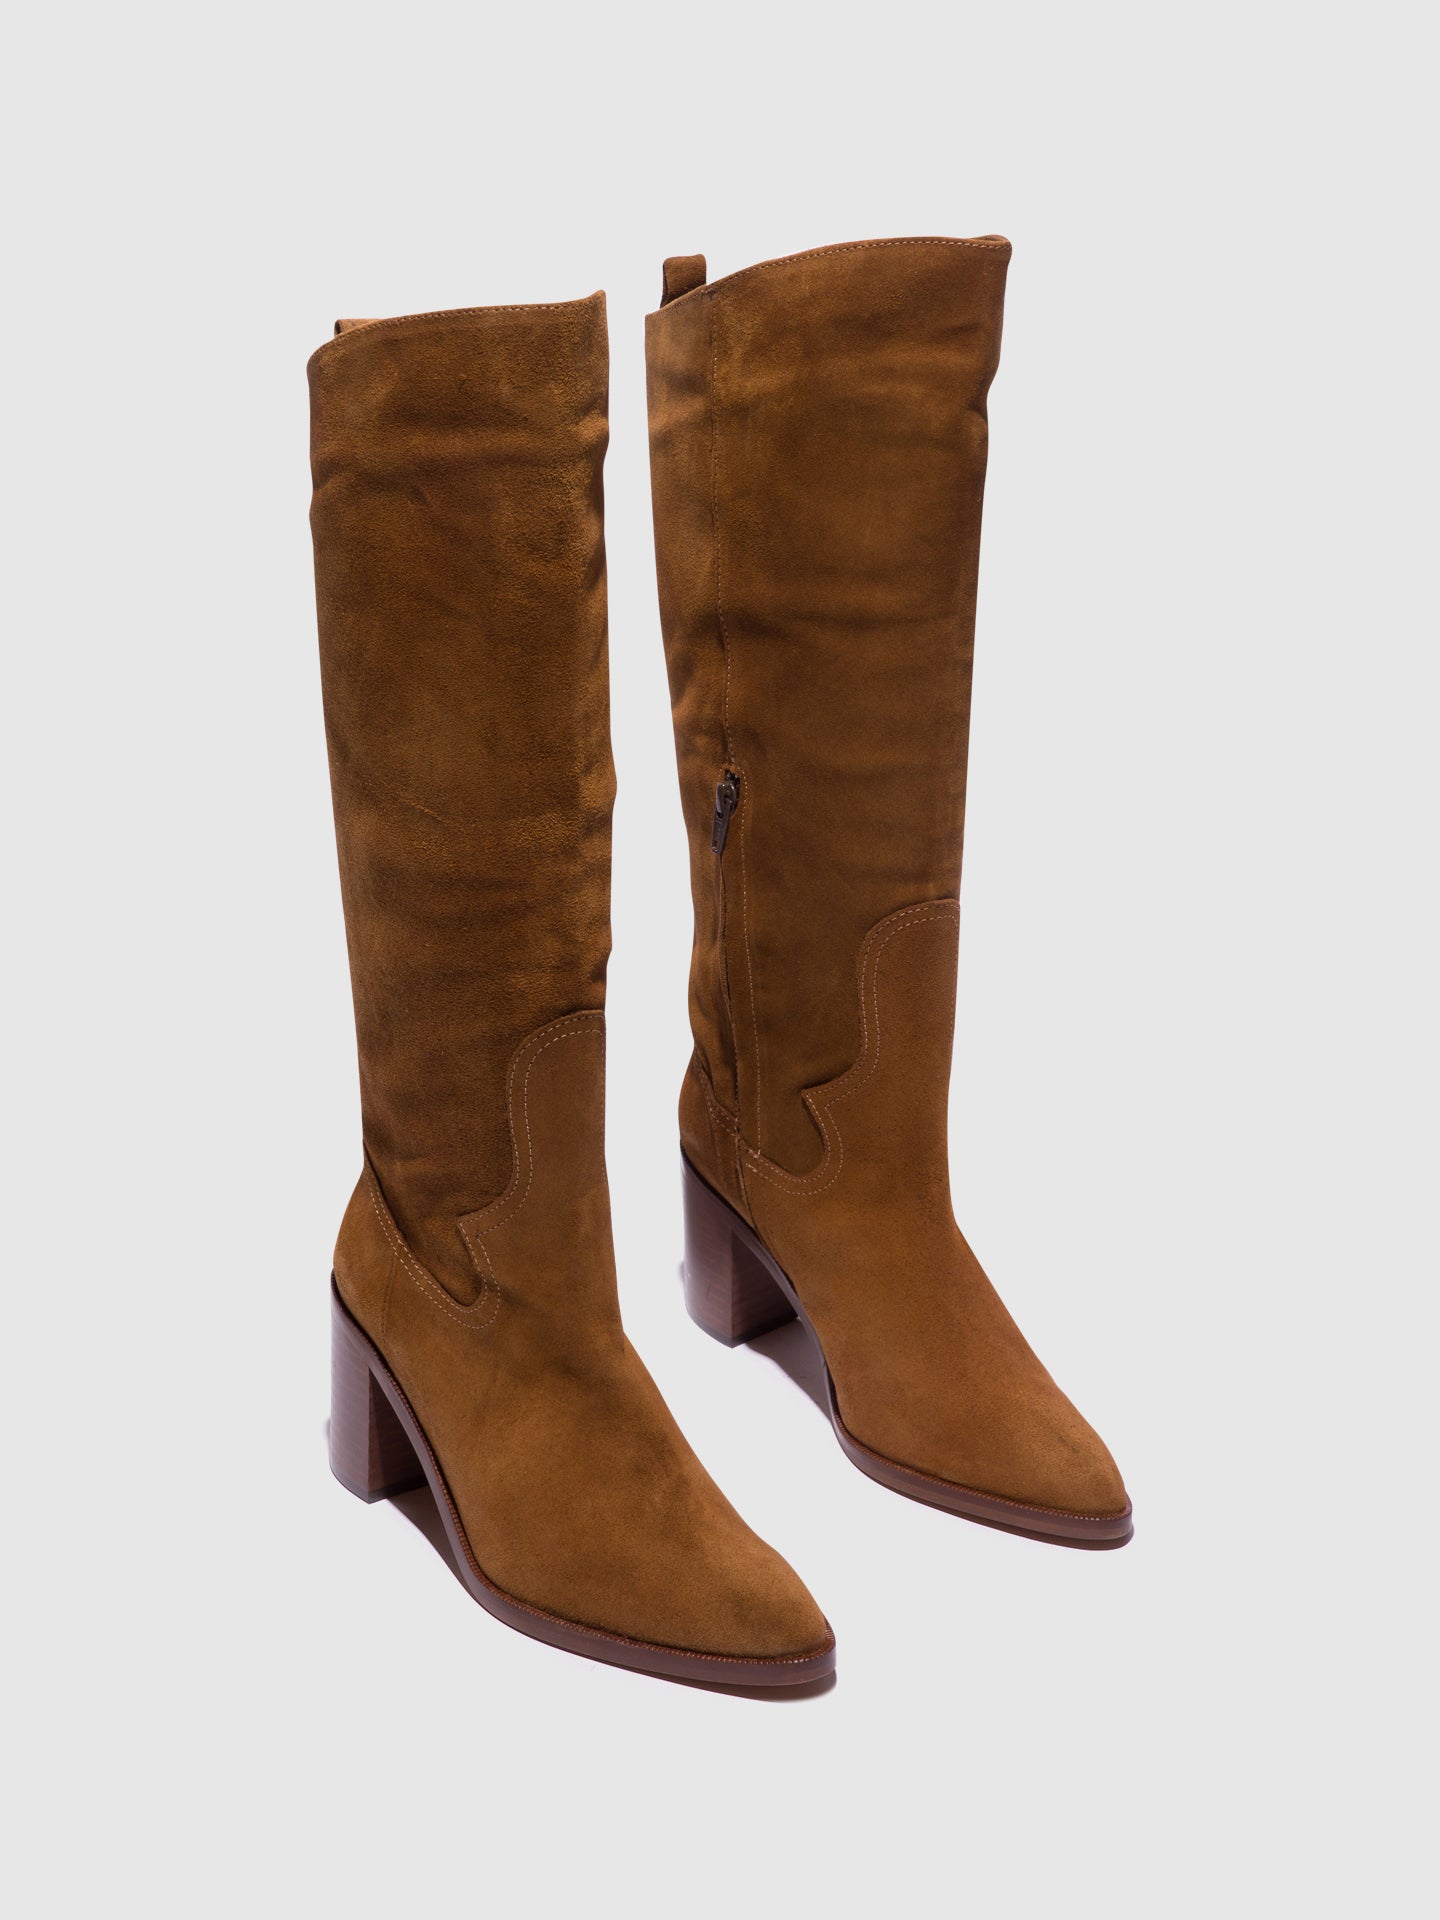 Foreva Camel Zip Up Boots